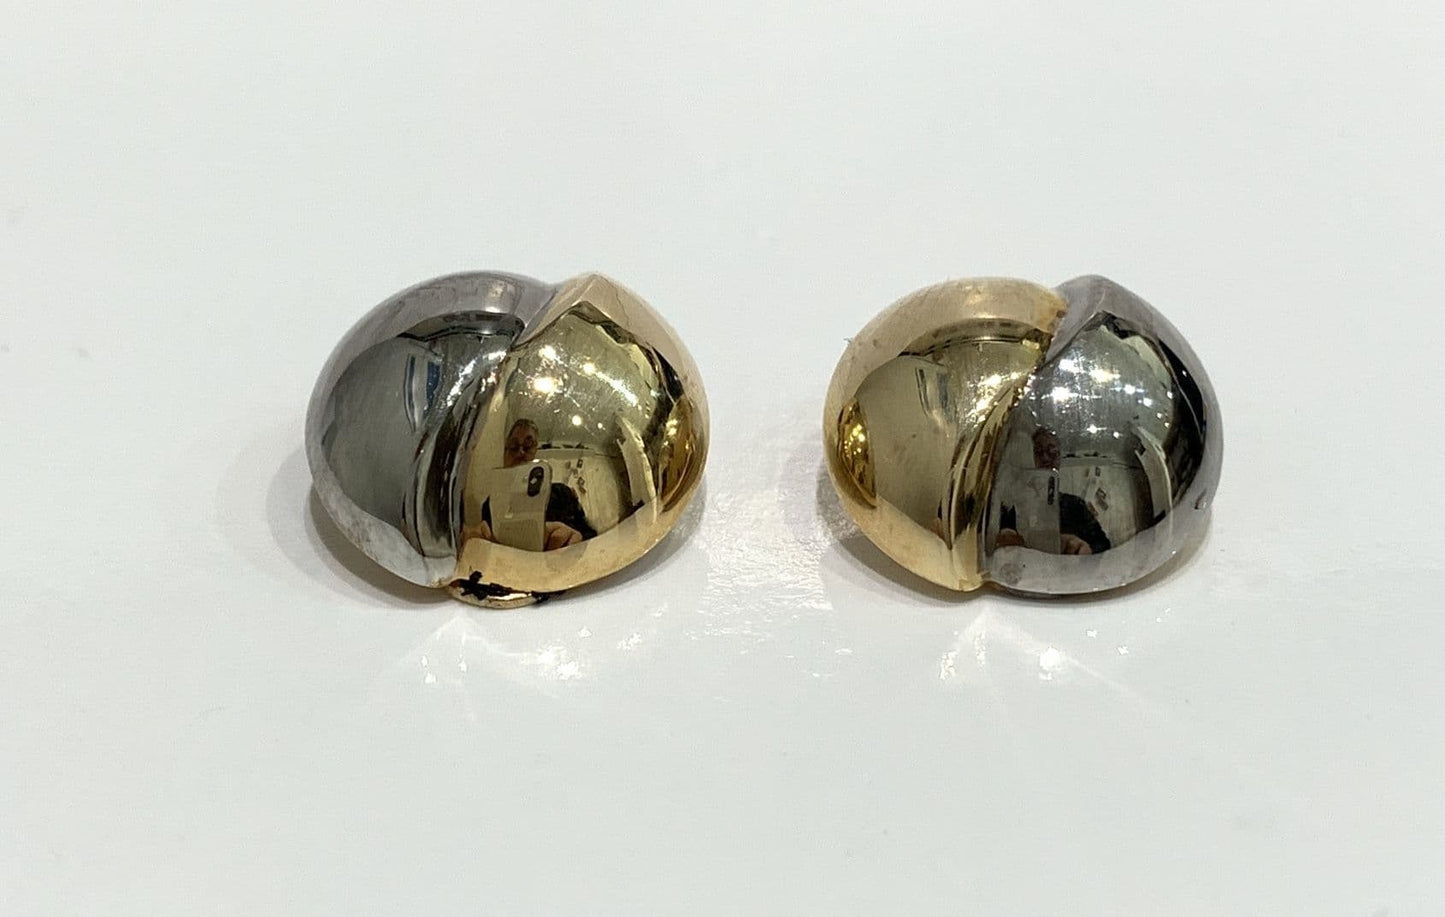 Clip on earrings with two tone yellow and white gold